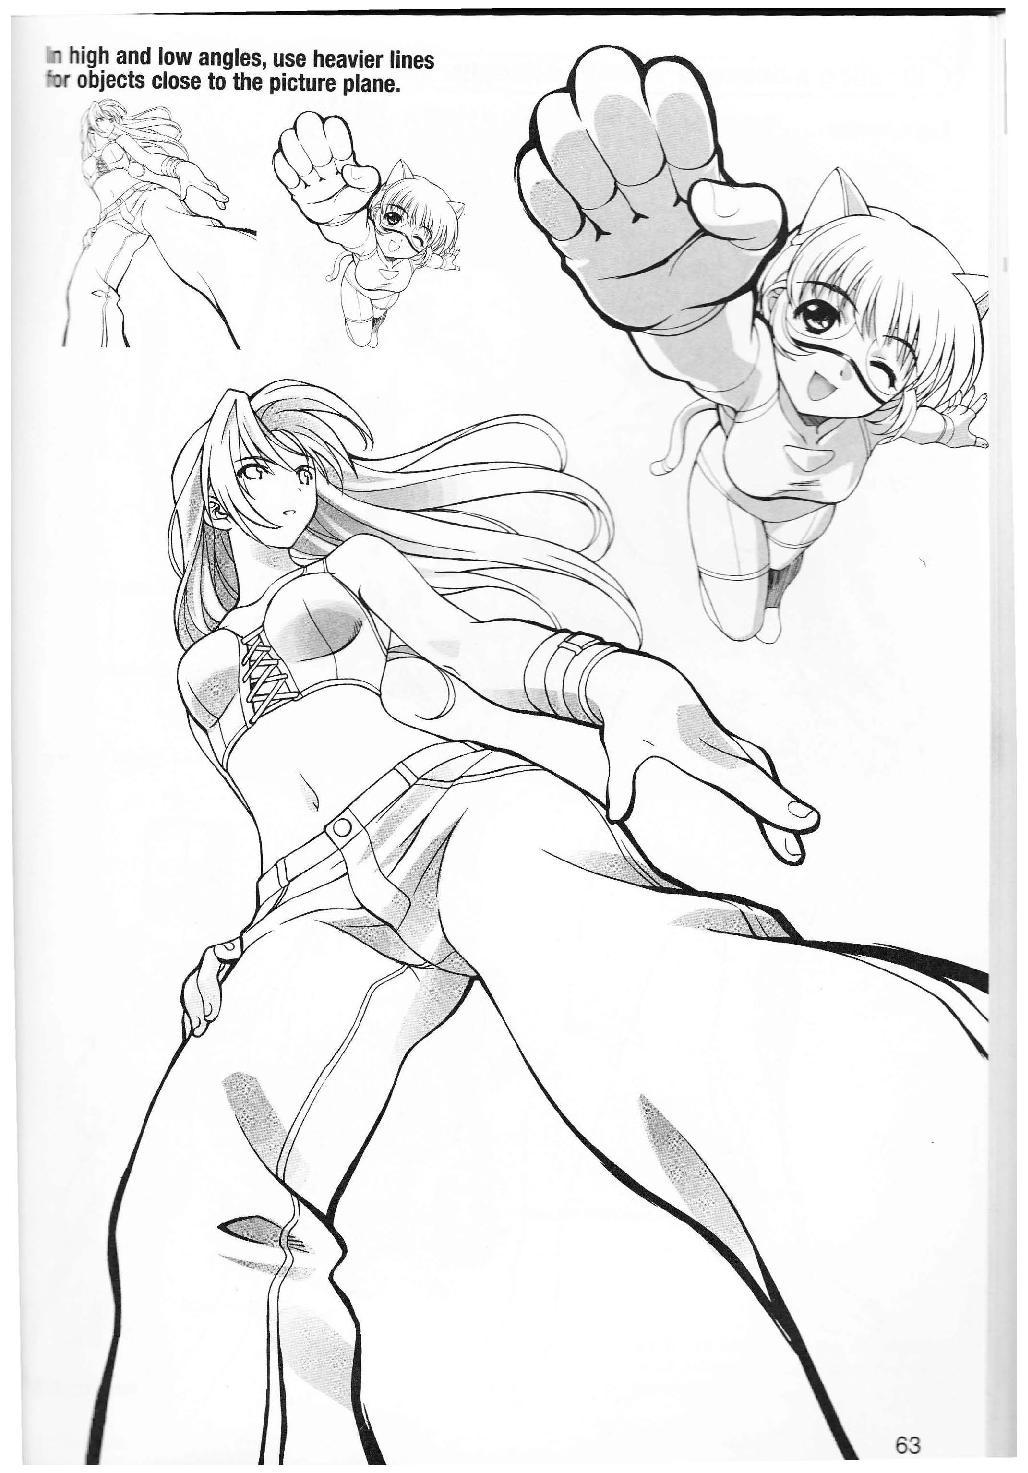 More How to Draw Manga Vol. 2 - Penning Characters 64